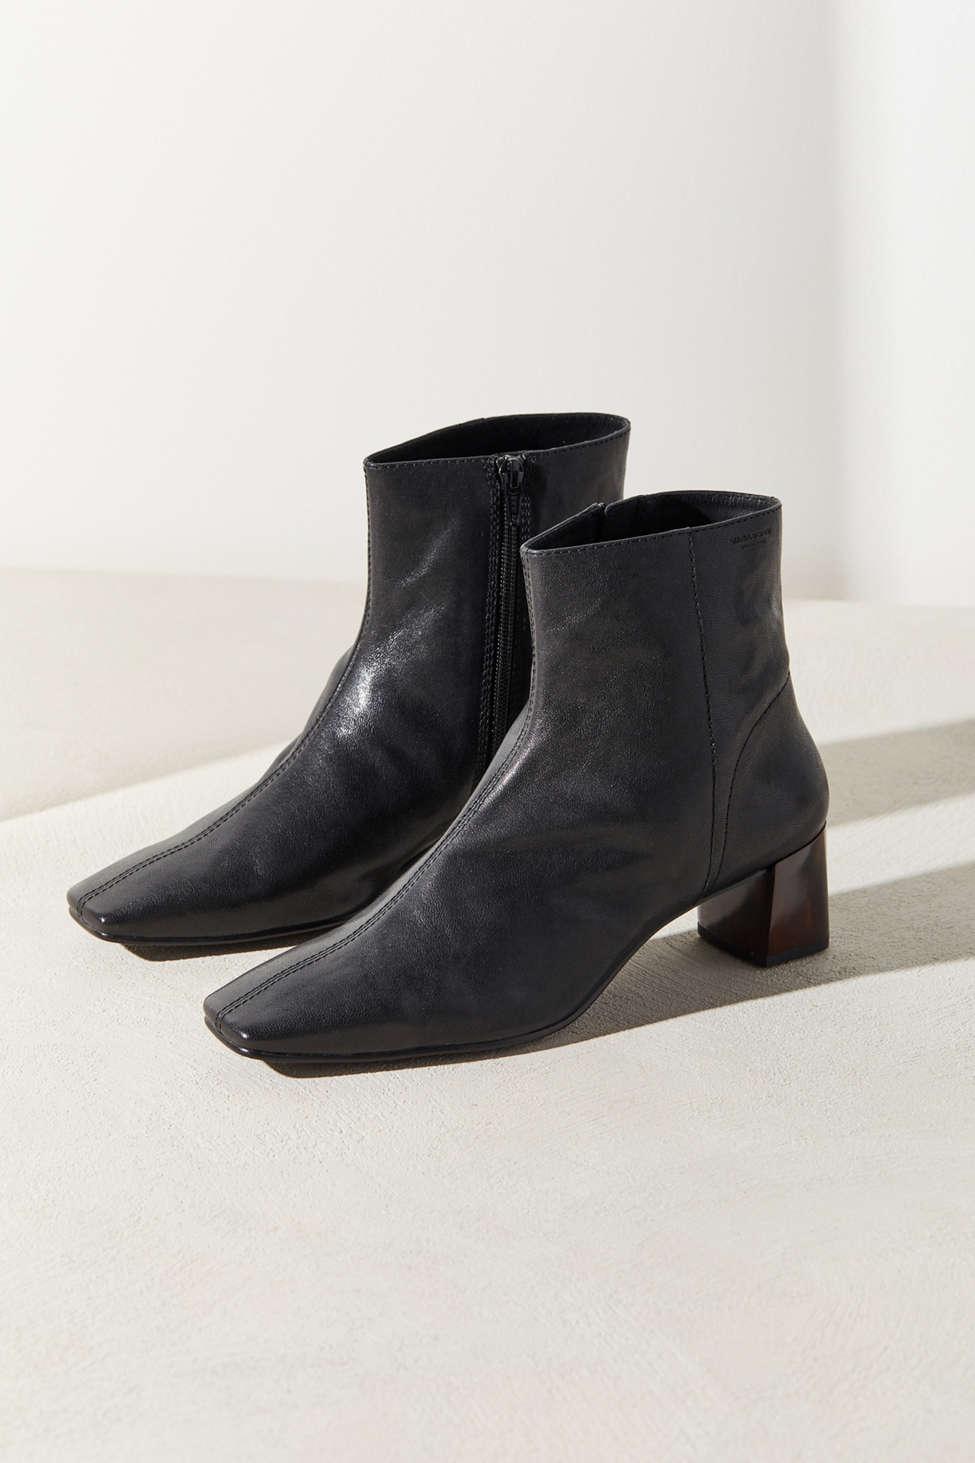 Vagabond Leather Leah Boot in Black - Lyst